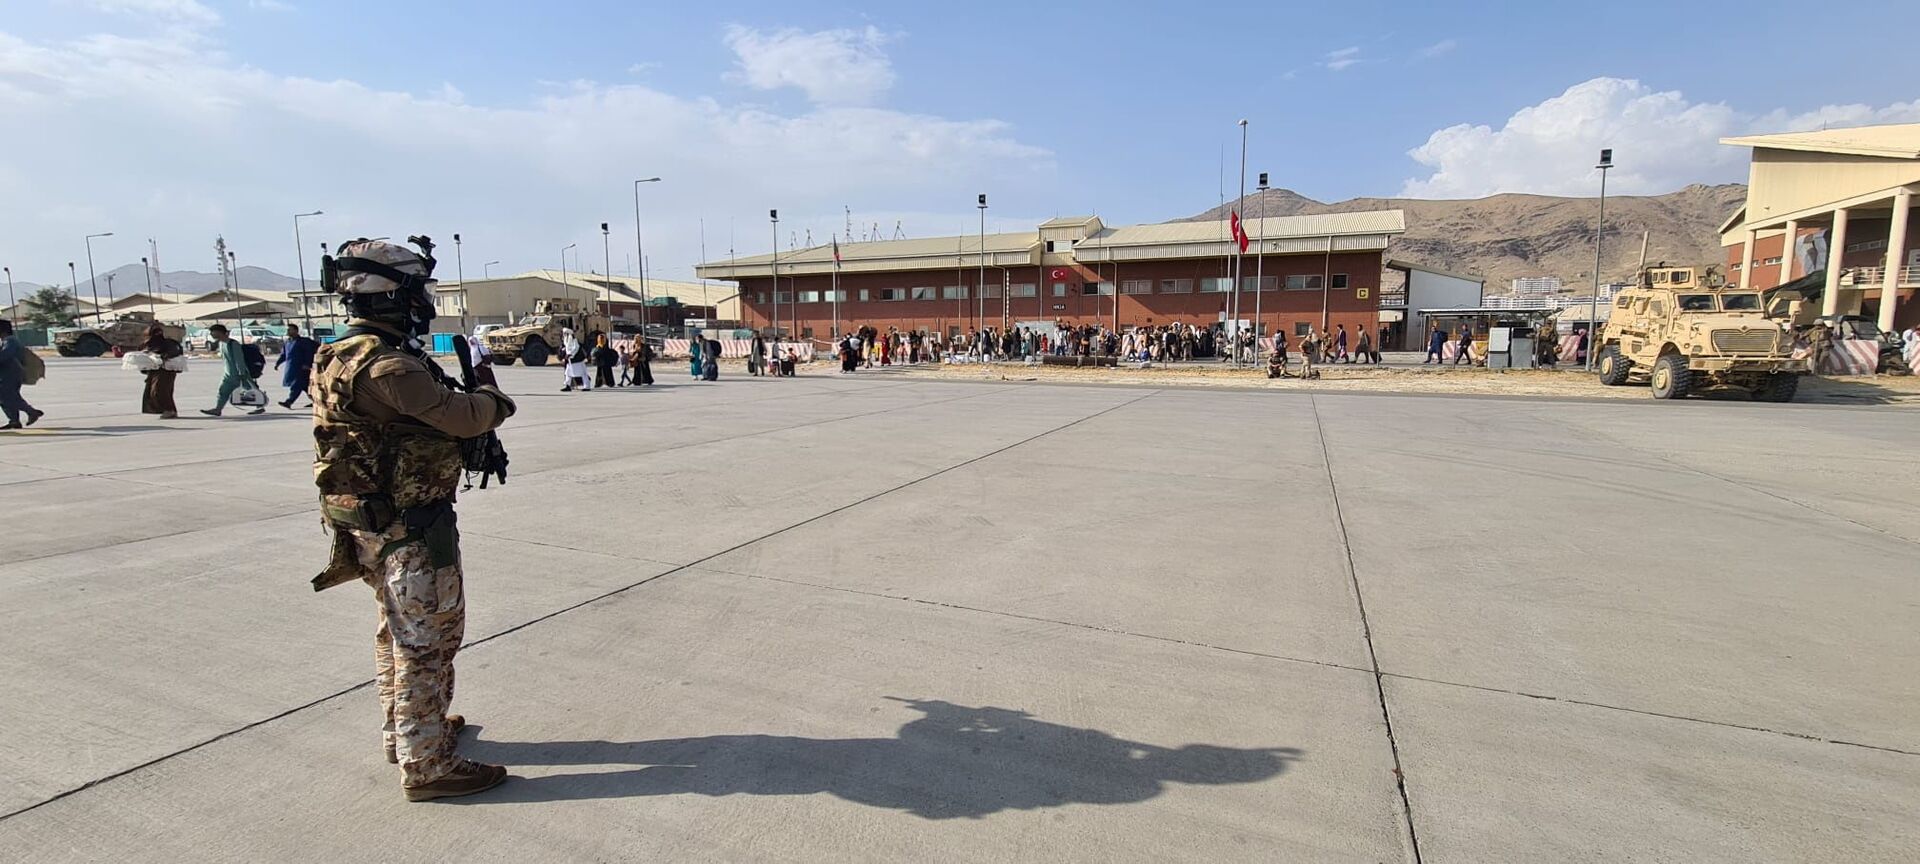 Afghan evacuees queue before boarding Italy's military aircraft C130J during the evacuation at Kabul's airport, Afghanistan, August 22, 2021. Italian Ministry of Defence/Handout via REUTERS - Sputnik International, 1920, 07.09.2021